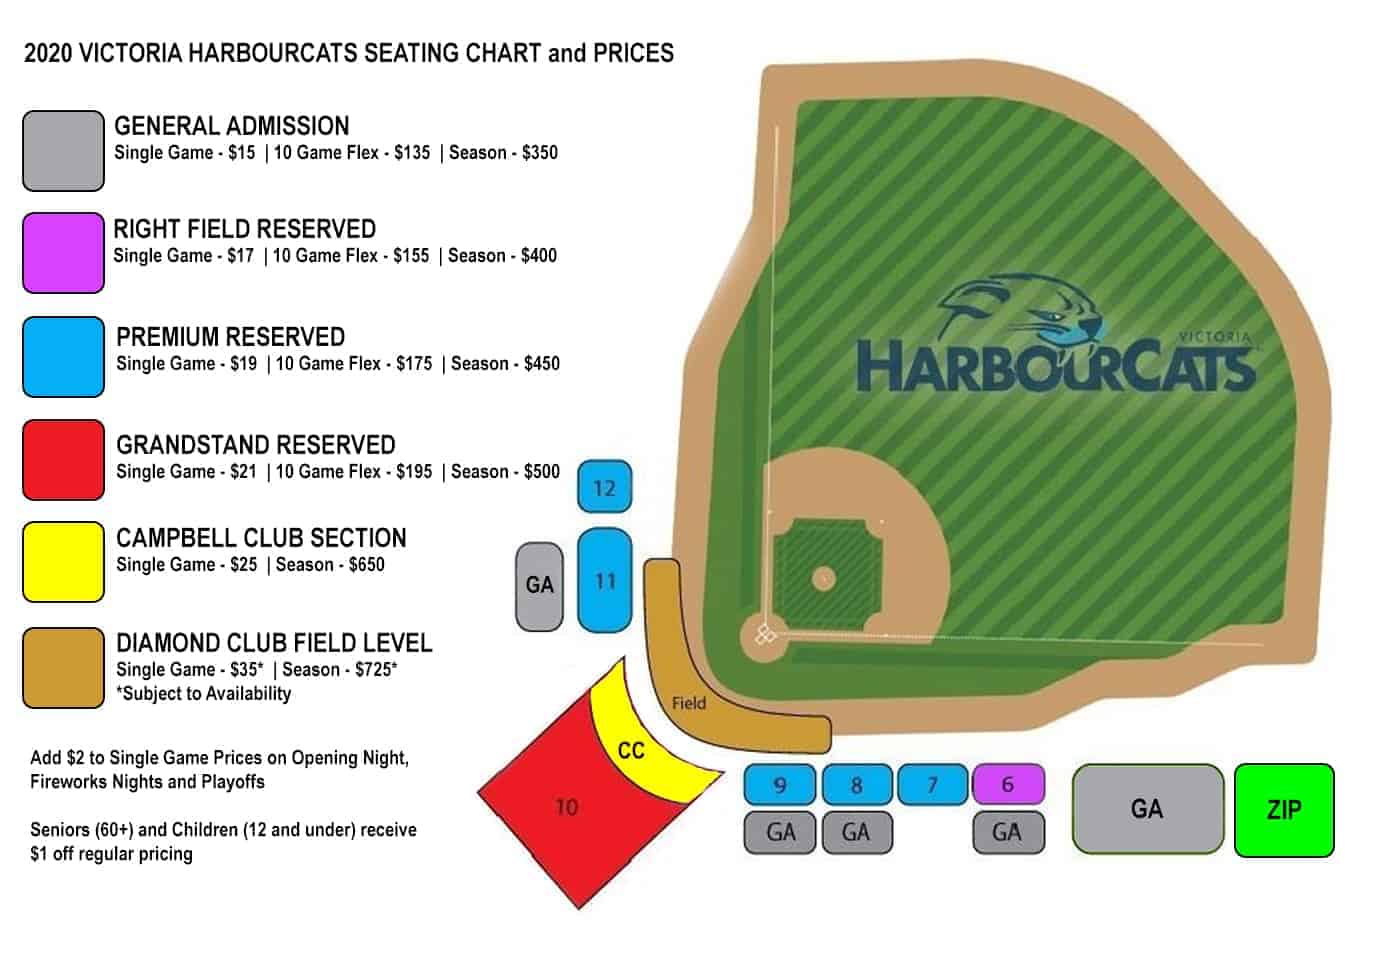 Western Financial Place Seating Chart